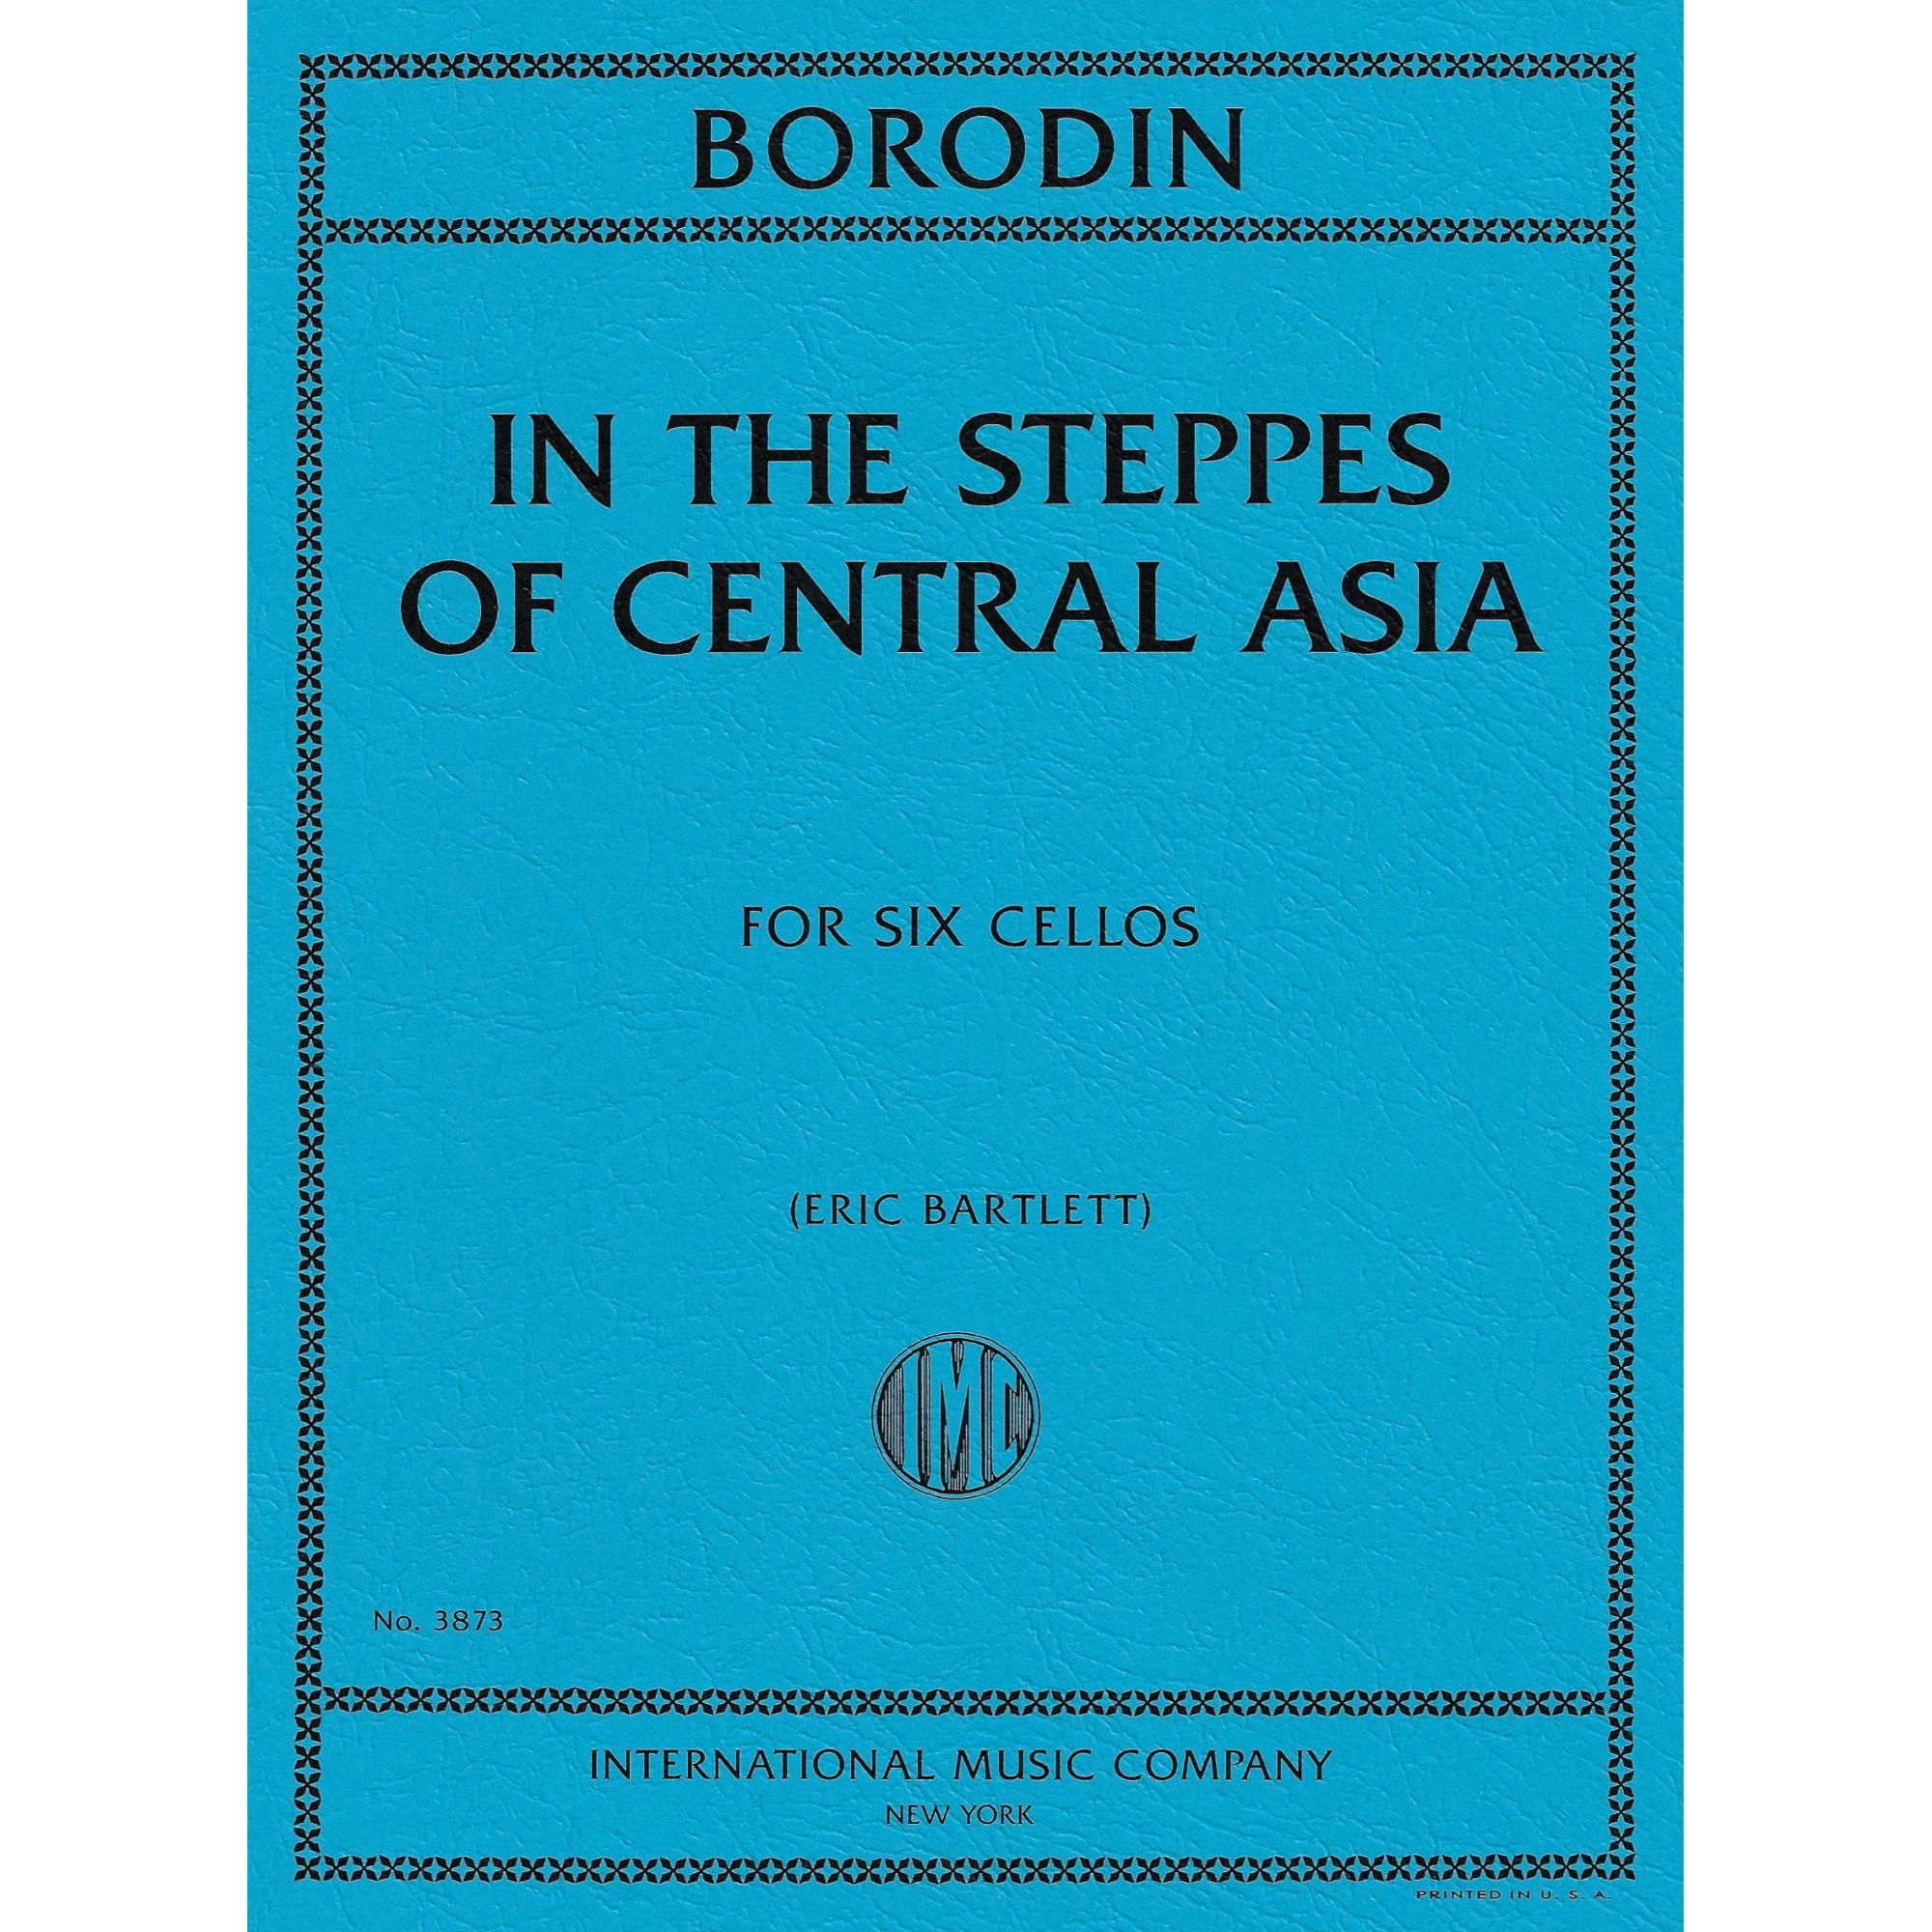 Borodin -- In the Steppes of Central Asia for Six Cellos